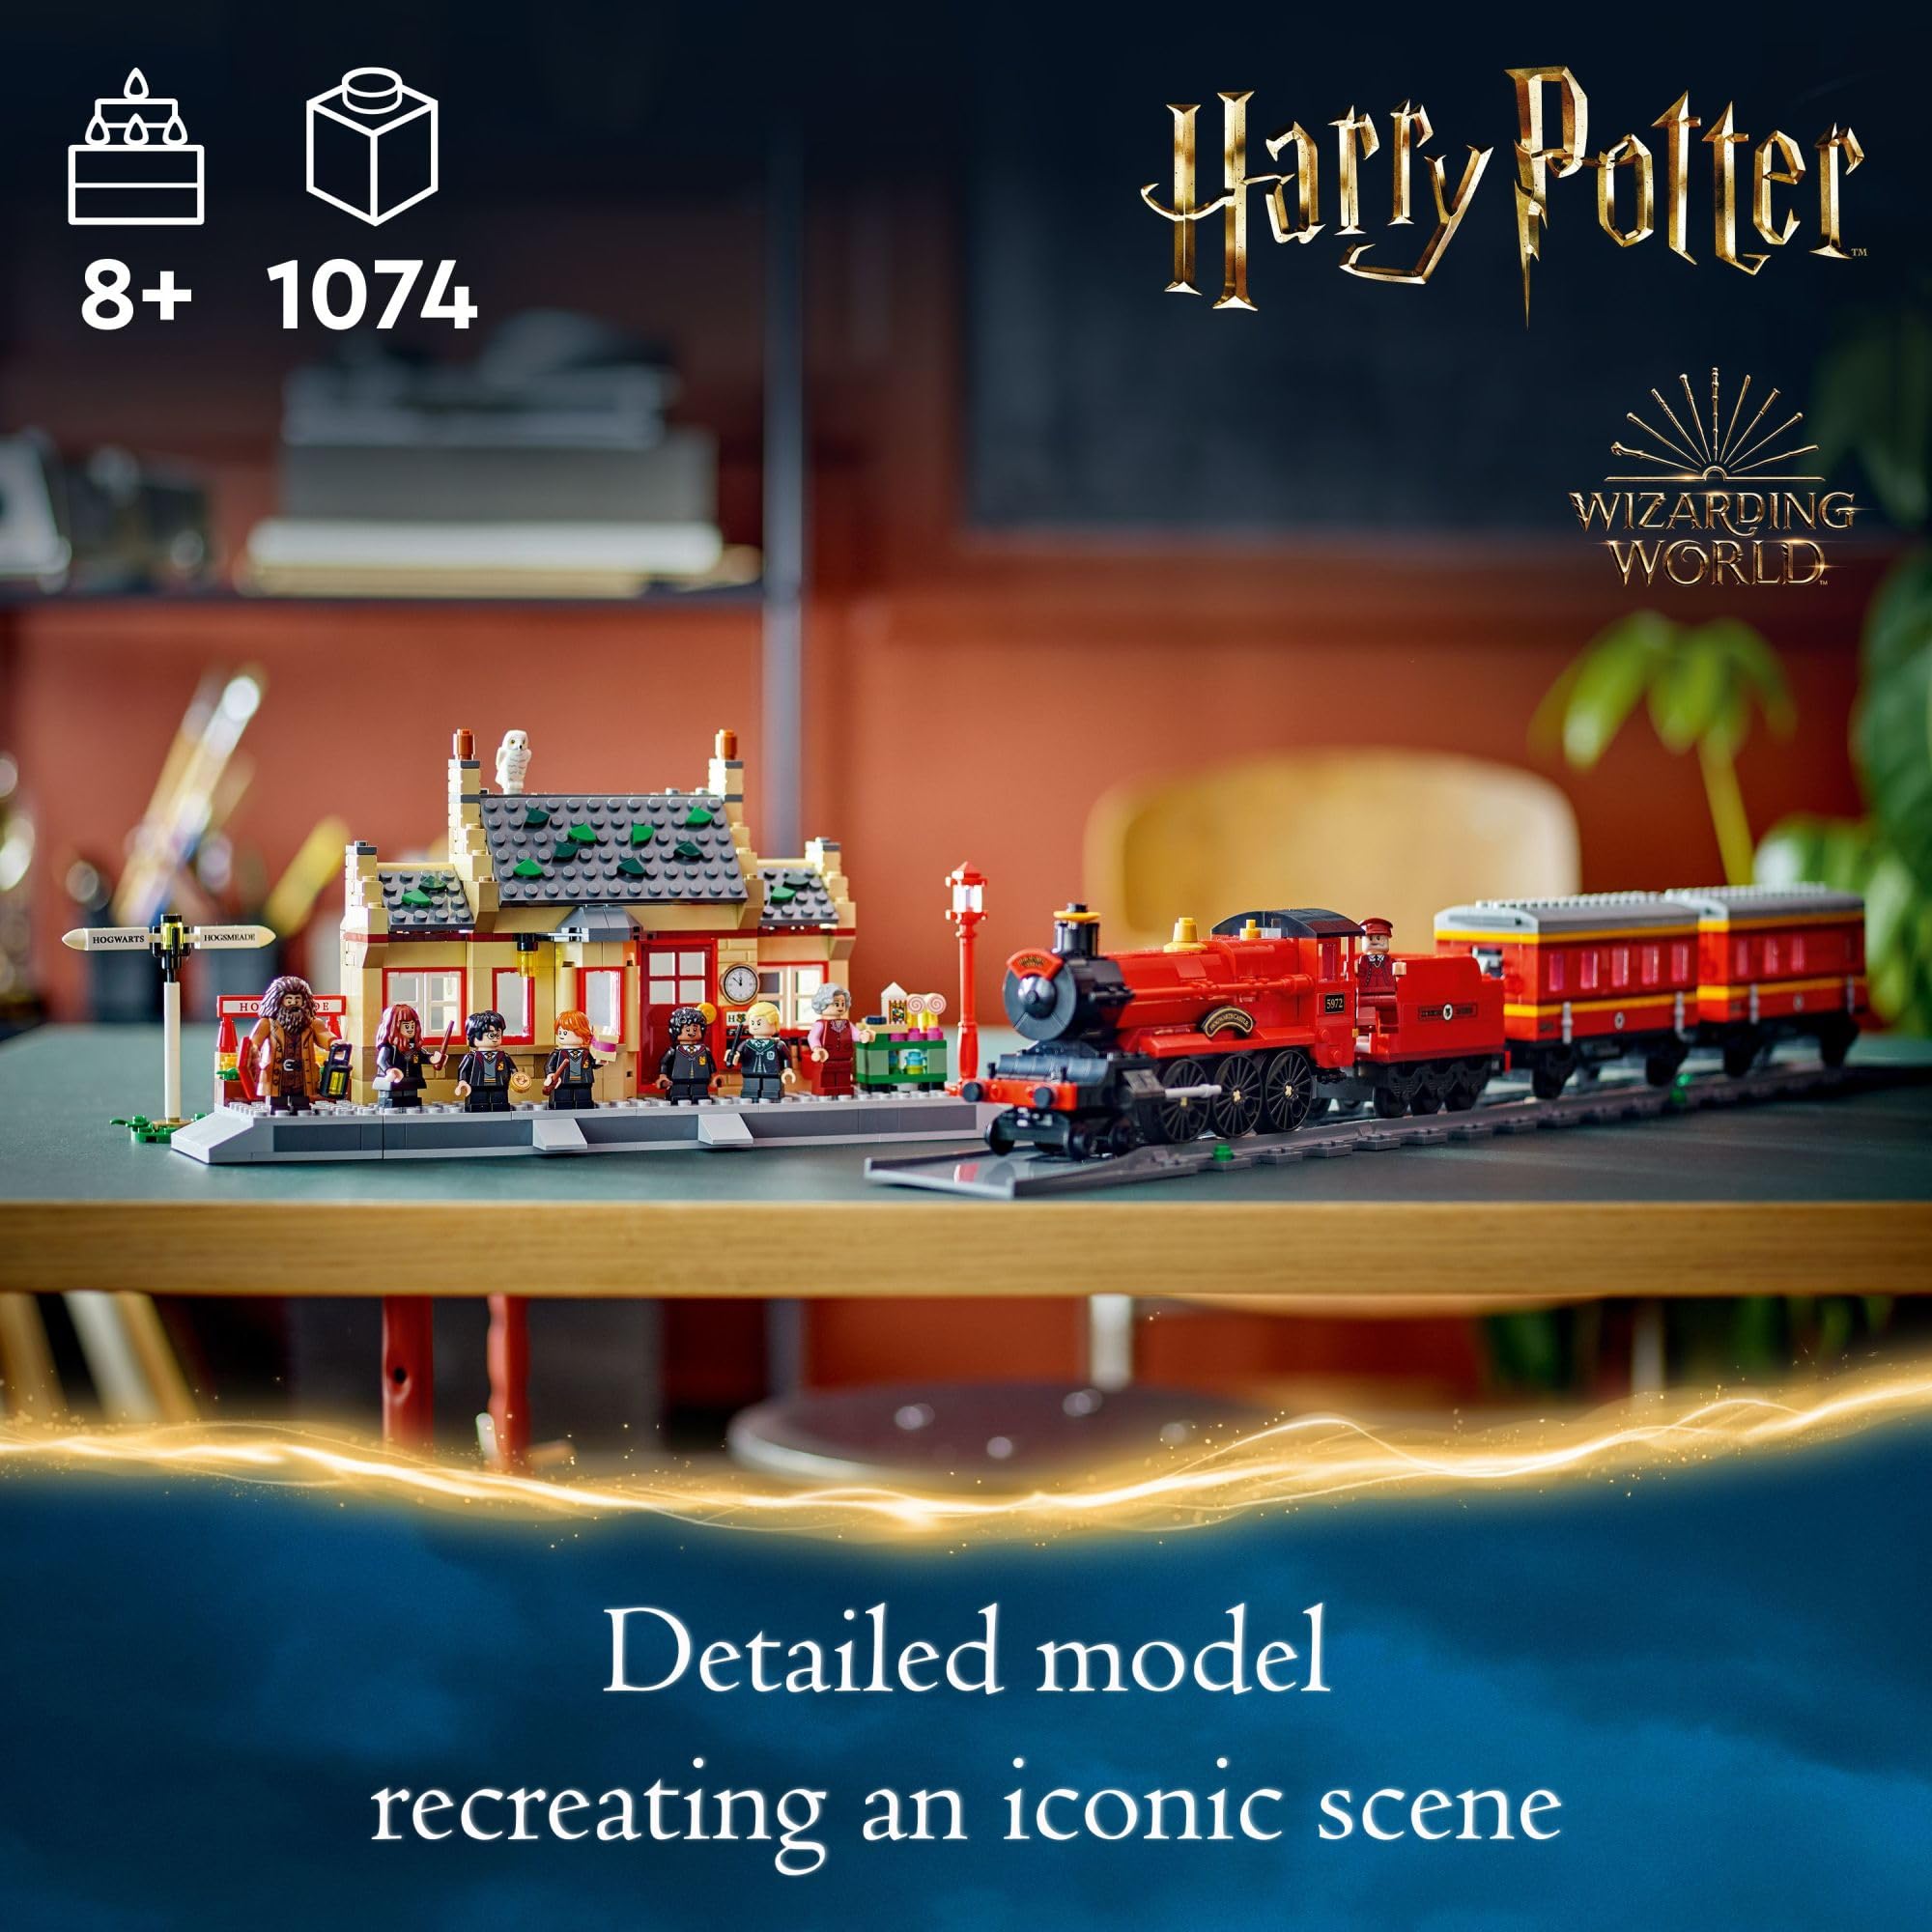 LEGO Harry Potter Hogwarts Express & Hogsmeade Station 76423 Building Toy Set; Harry Potter Gift Idea for Fans Aged 8+; Features a Buildable Train, Tracks, Ticket Office and 8 Harry Potter Minifigures